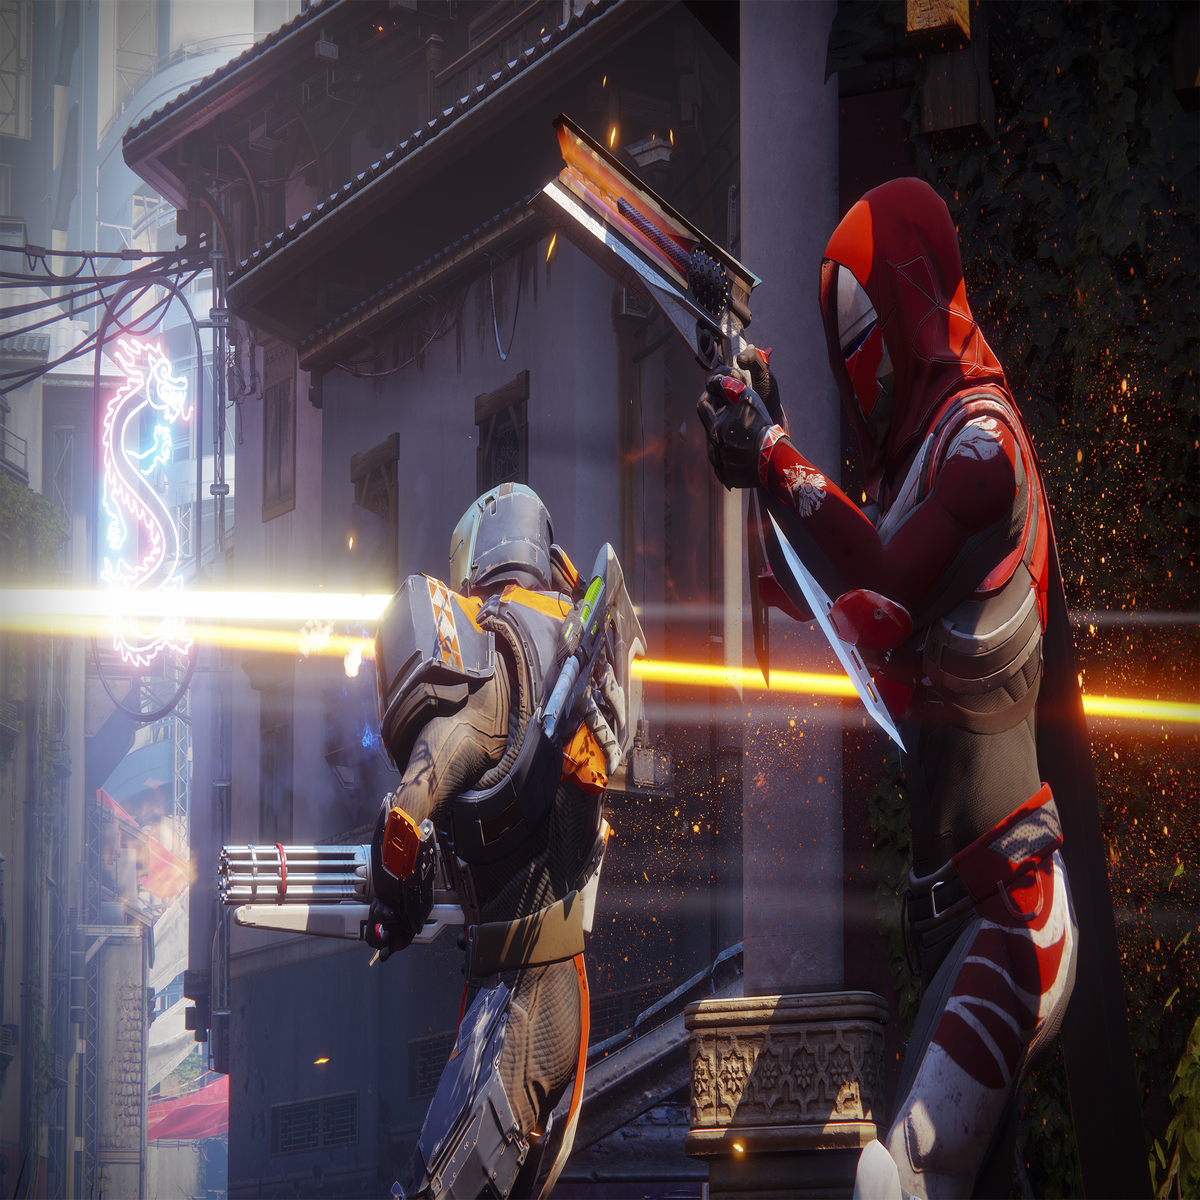 Destiny 2's full reveal trailer has dropped, PC version confirmed